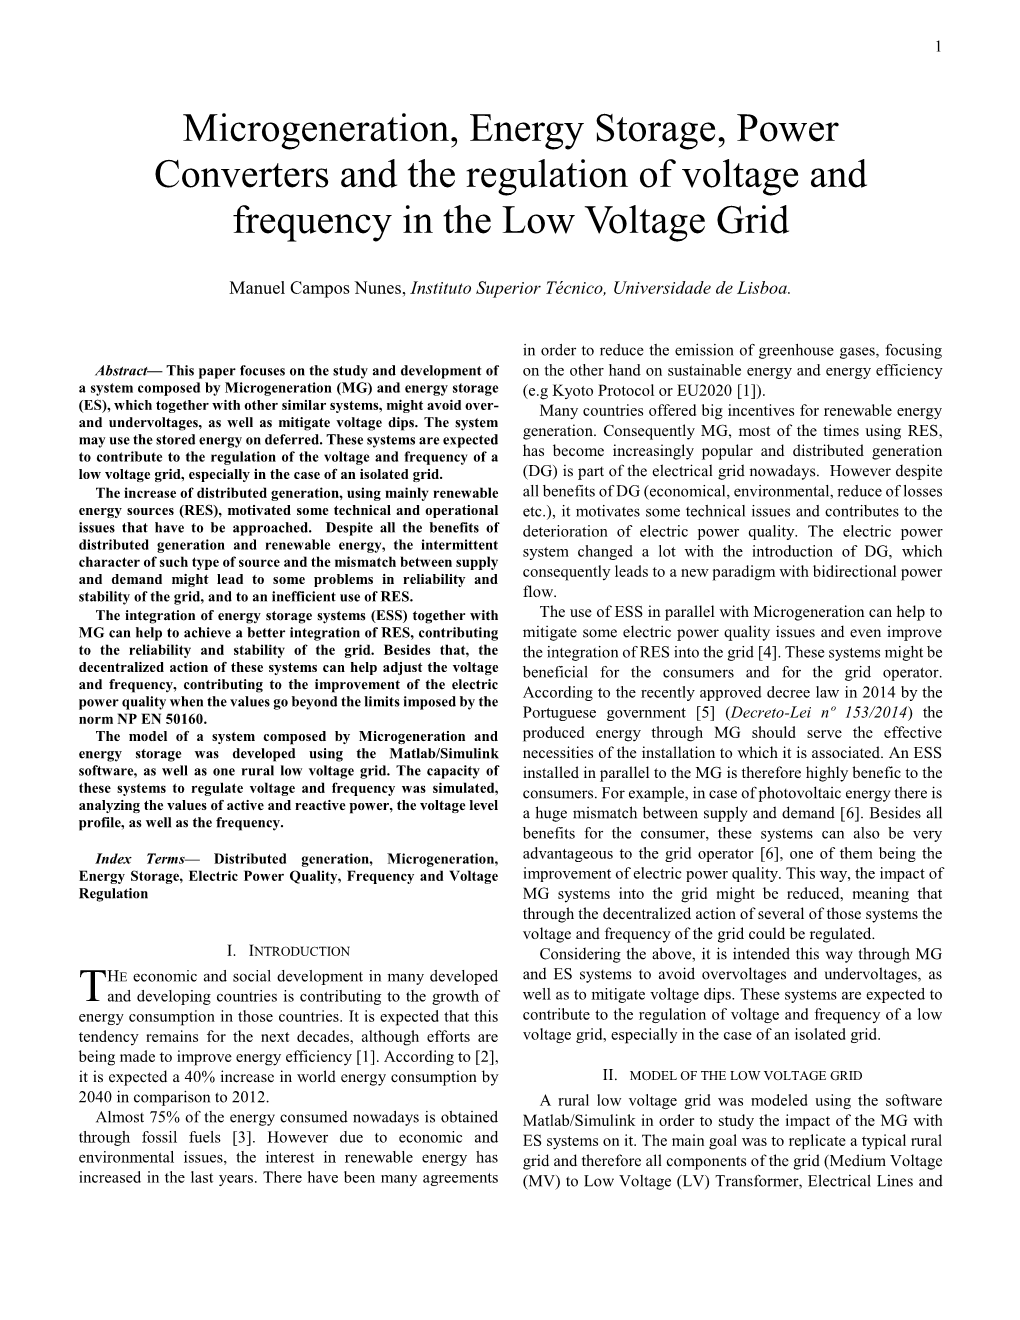 Microgeneration, Energy Storage, Power Converters and the Regulation of Voltage and Frequency in the Low Voltage Grid